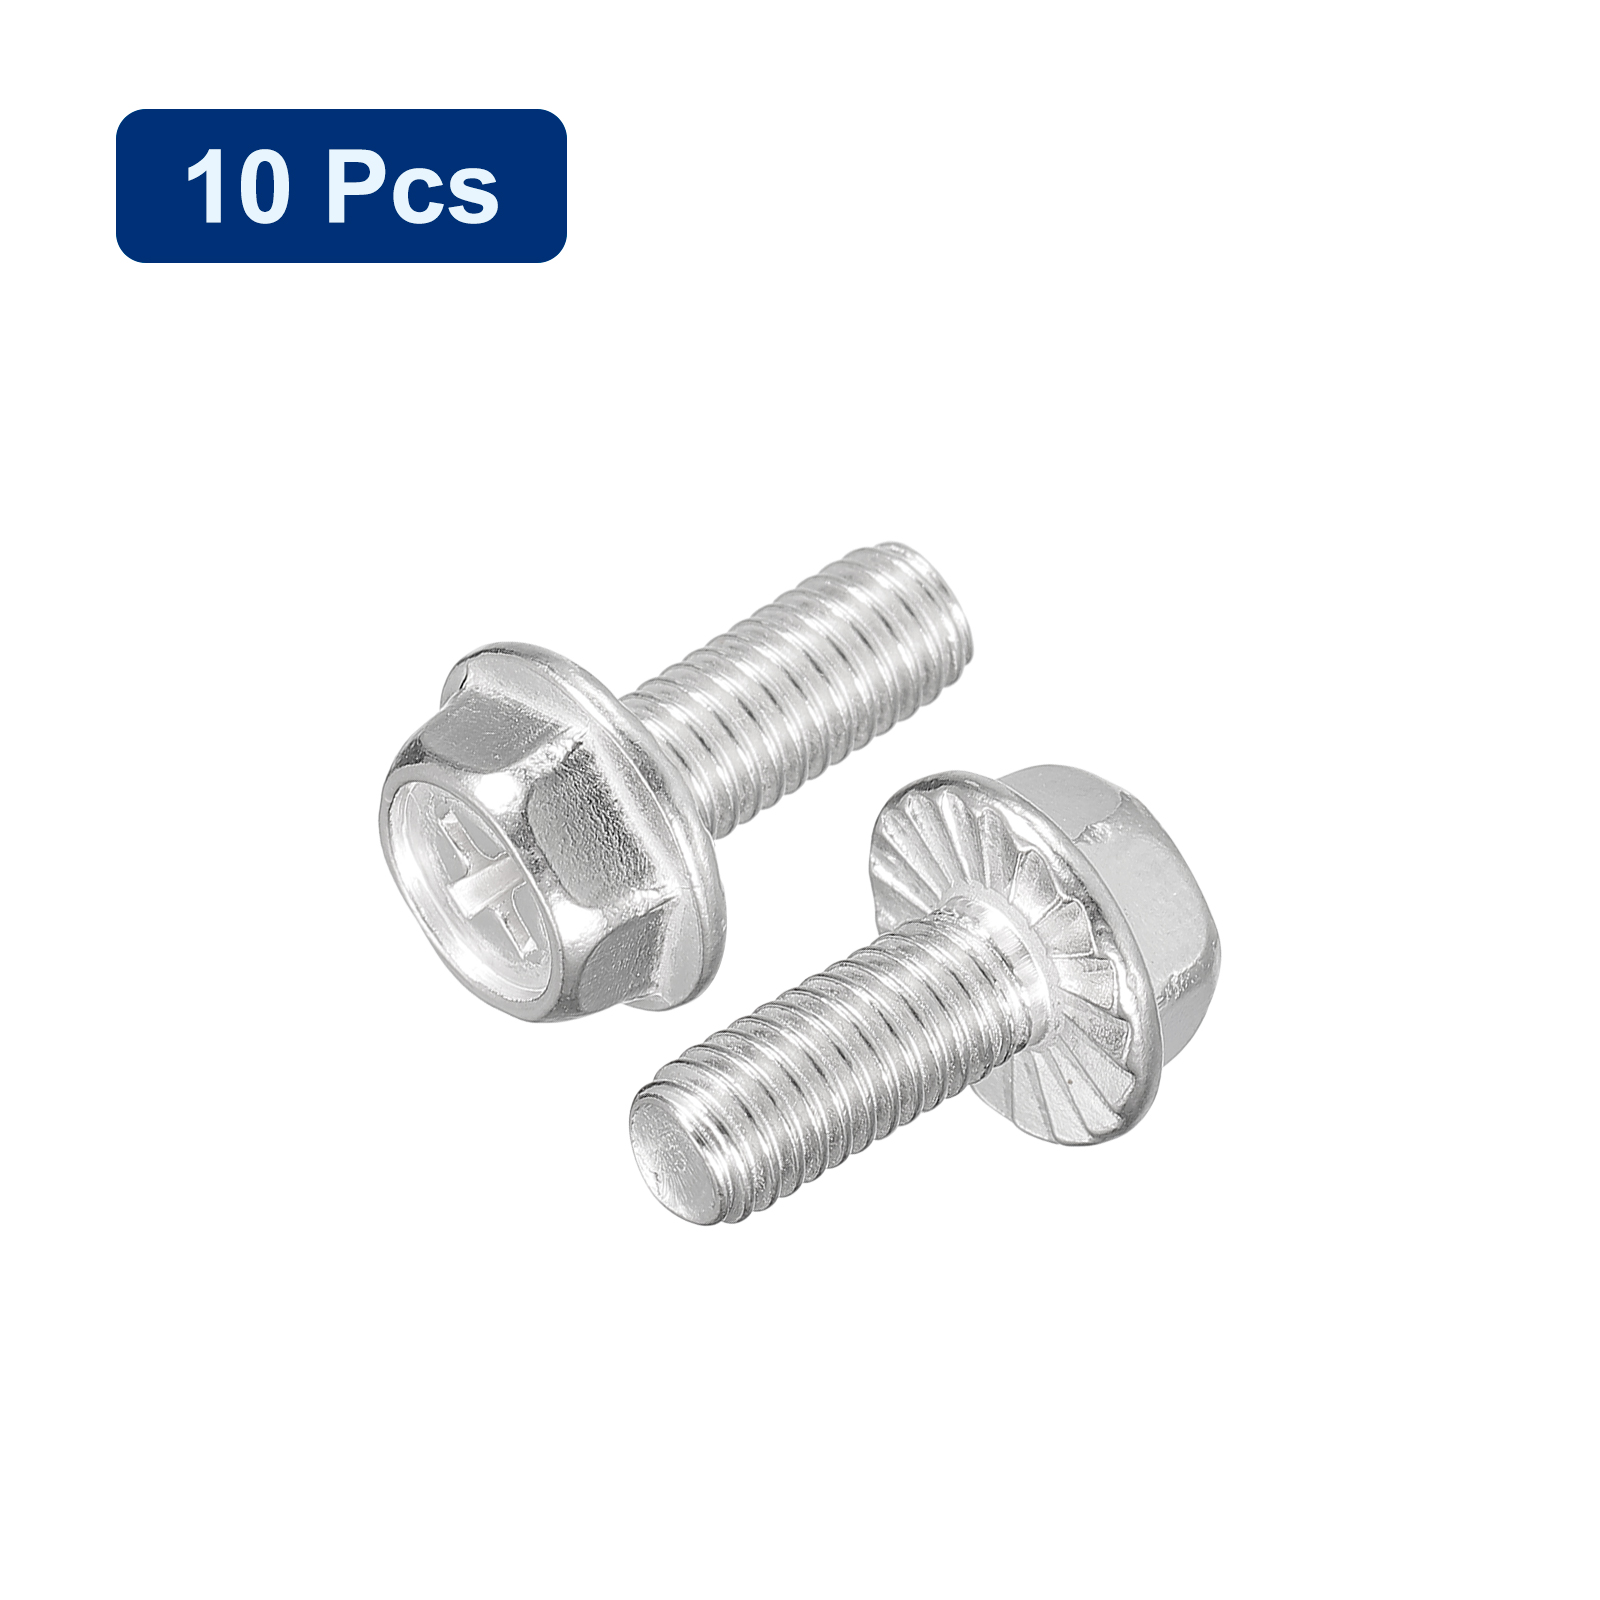 M6x14mm Phillips Hex Head Flange Bolts, 10 Pack 304 Stainless Steel Screws 